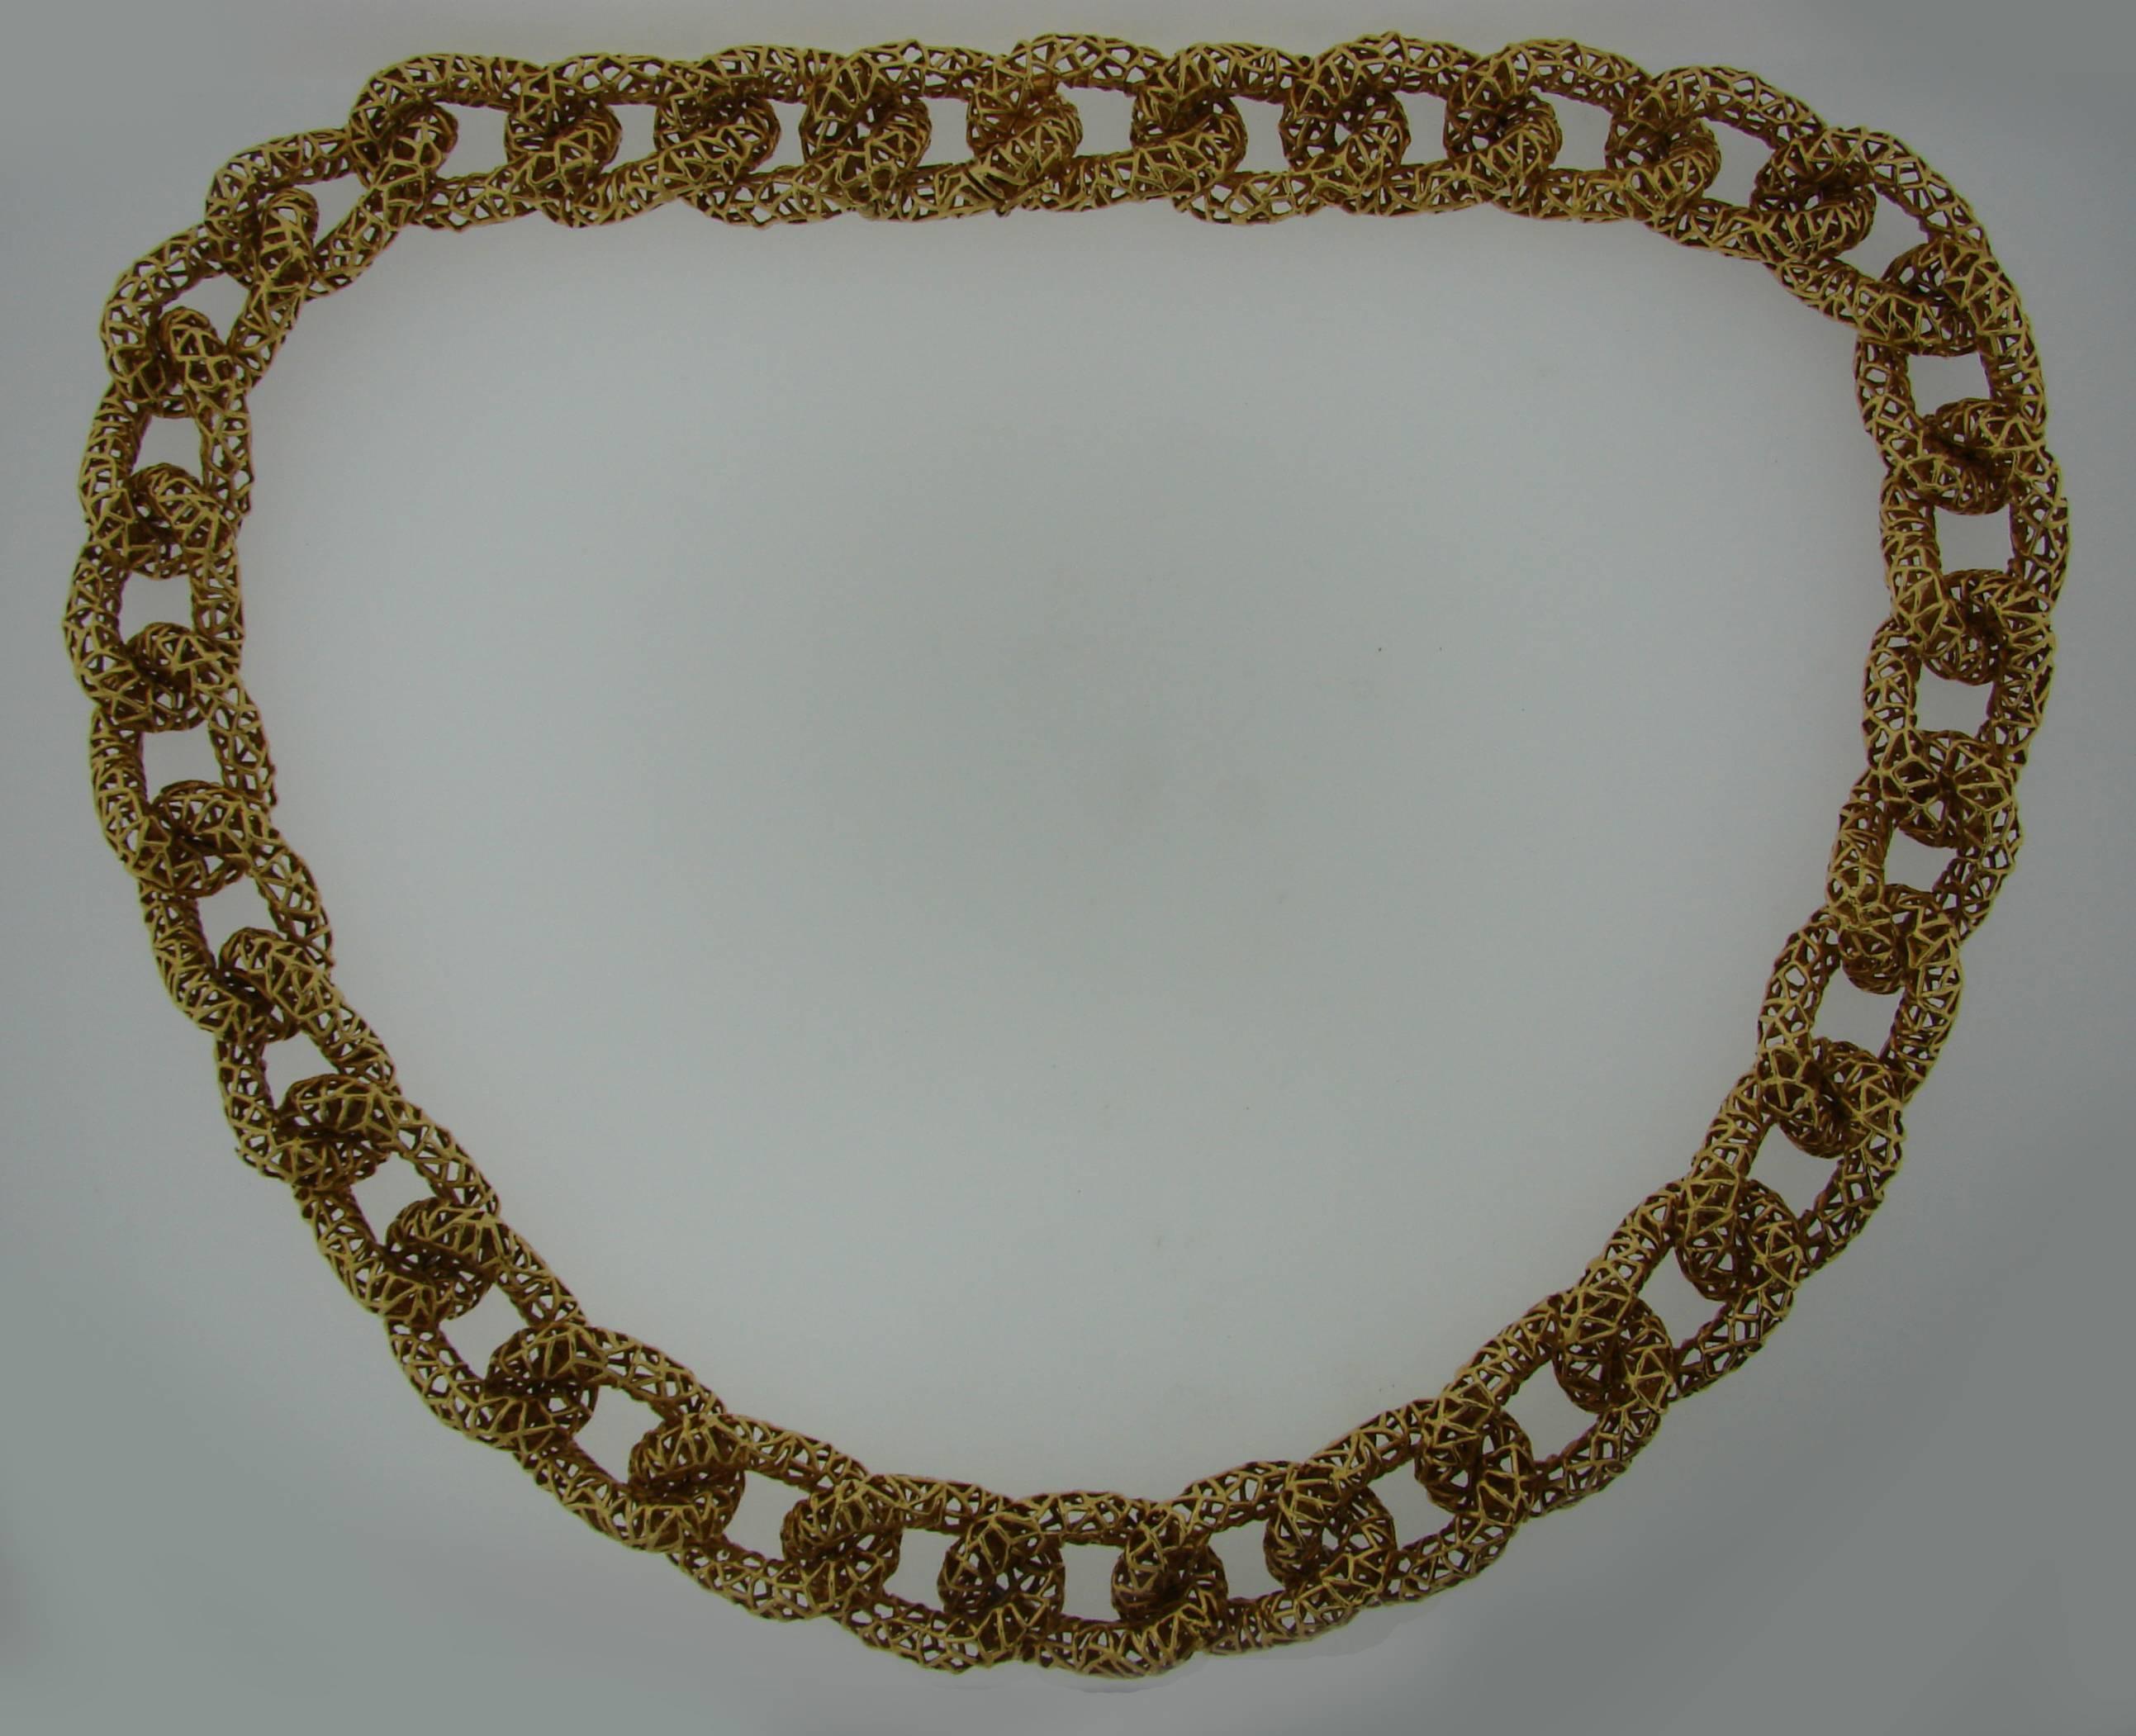 Chic and bold massive chain necklace created by Tiffany & Co. in the 1980's. 
Beautifully made openwork massive links! Made of 18k (stamped) yellow gold. 
The necklace is 30.75